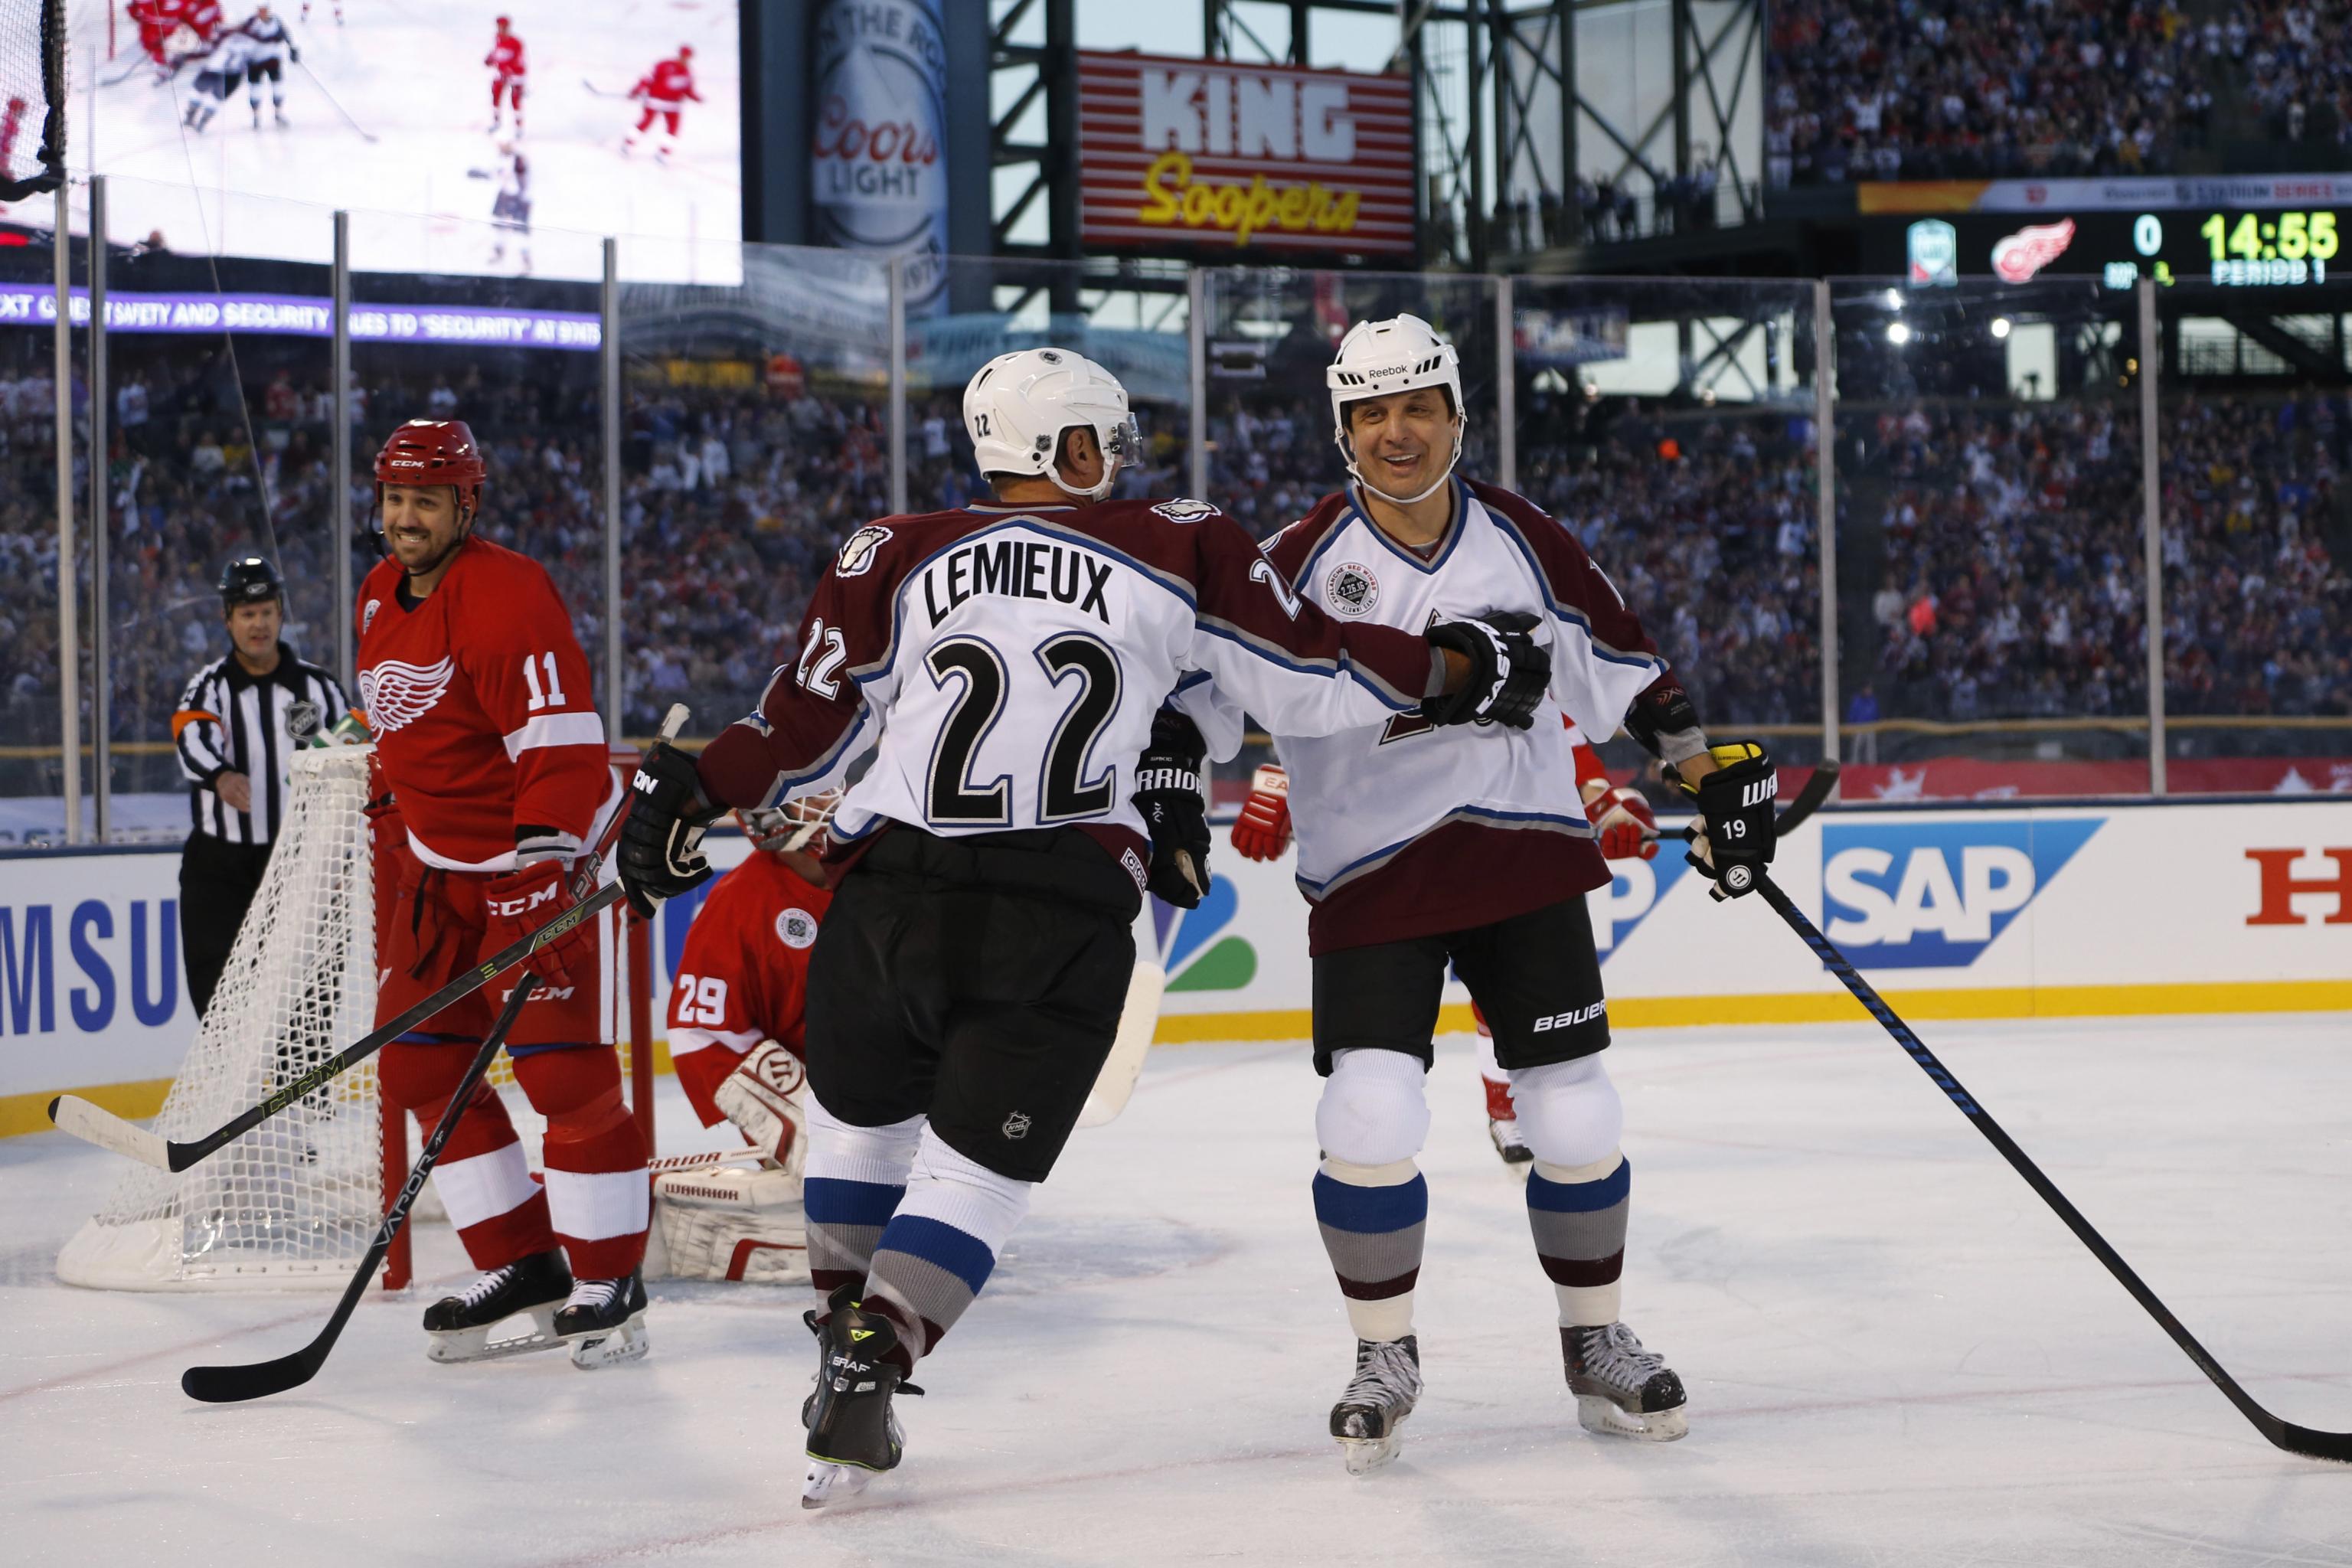 How to watch Detroit Red Wings vs. Colorado Avalanche alumni game